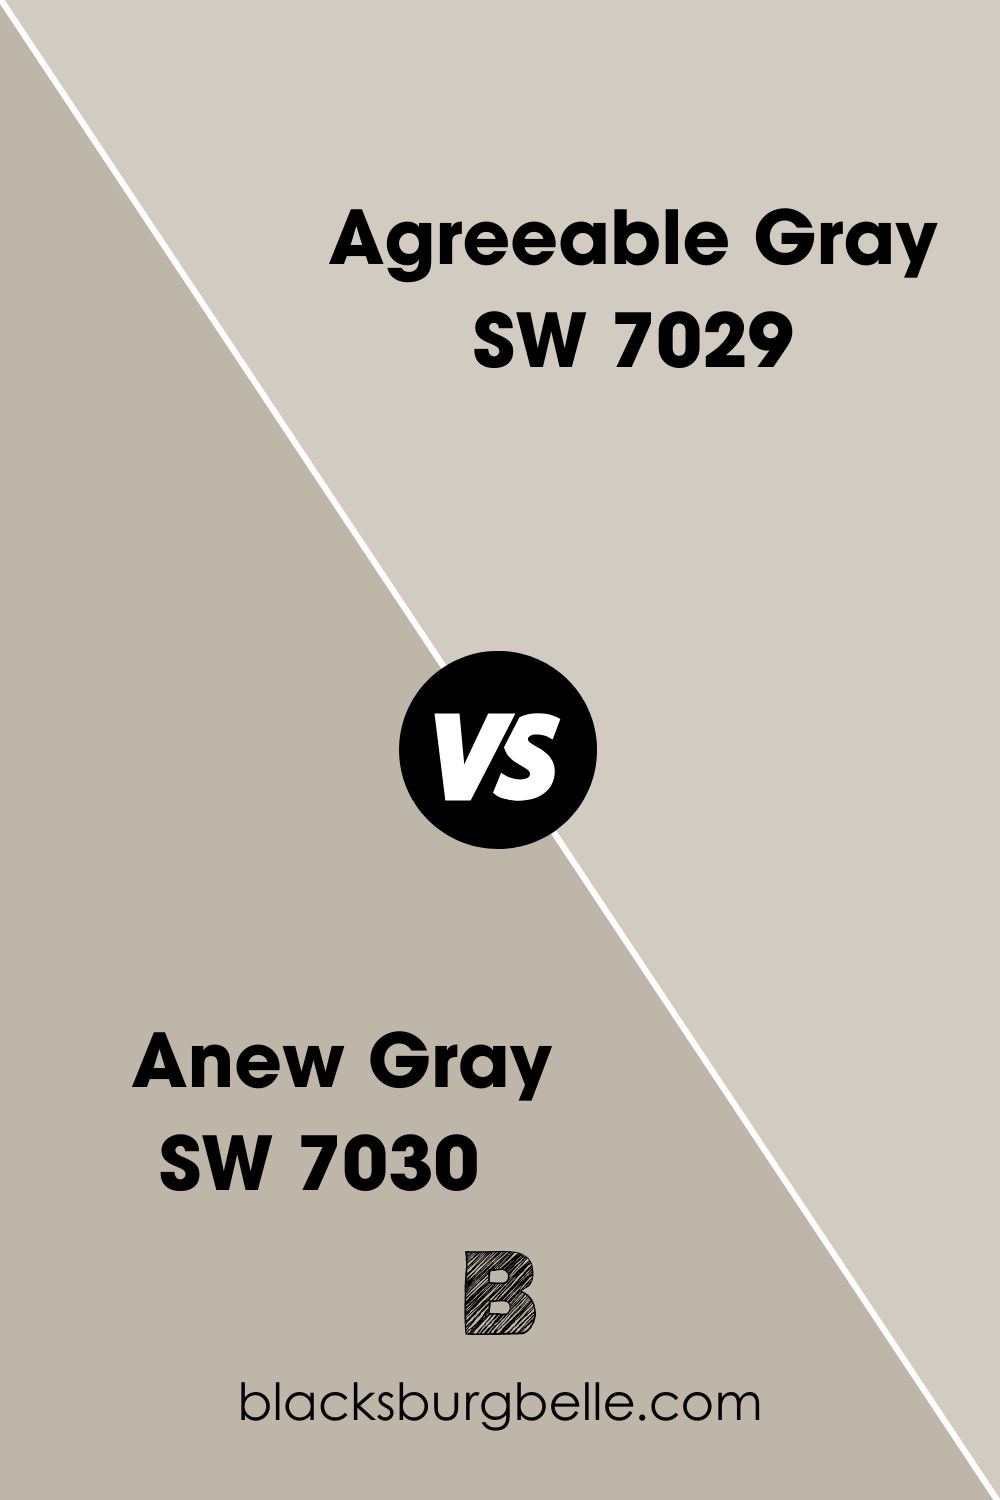 Anew Gray SW 7030 